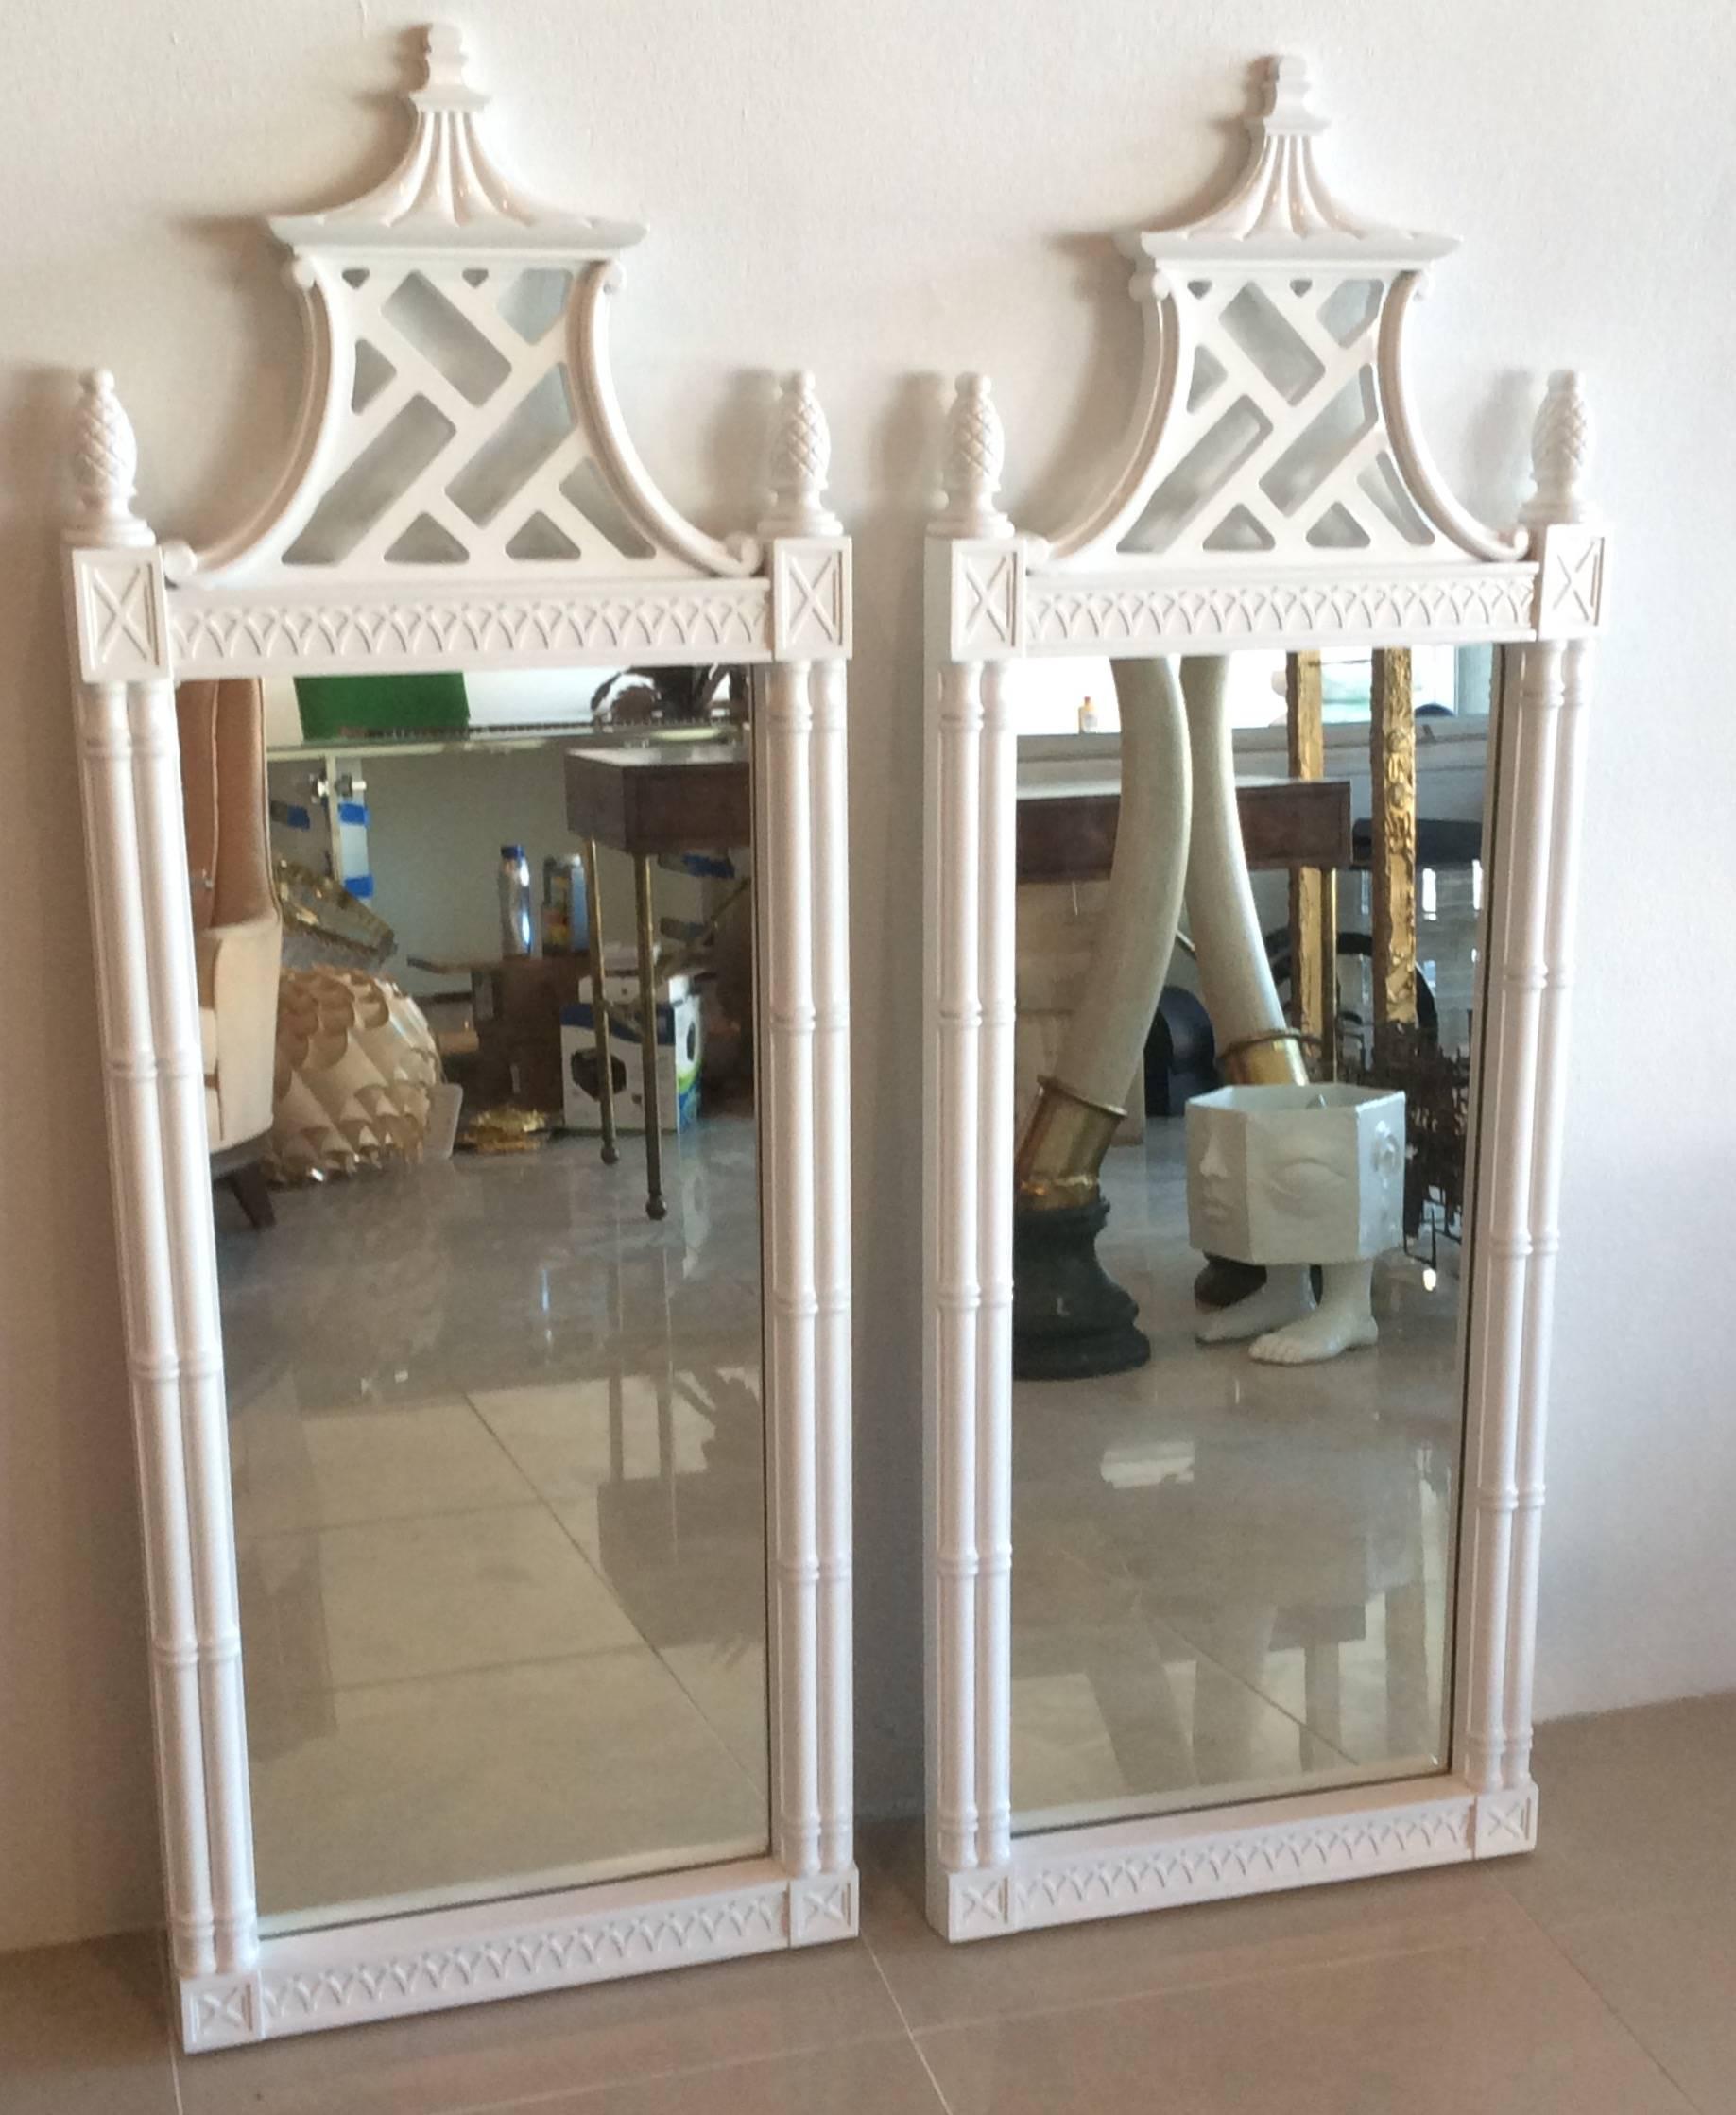 Amazing pair of Fretwork, fret work Chinese Chippendale, professionally newly lacquered white gloss pagoda wall mirrors by Thomasville Furniture. Fret work details, faux bamboo, and pineapple finials makes this piece nothing short of amazing and